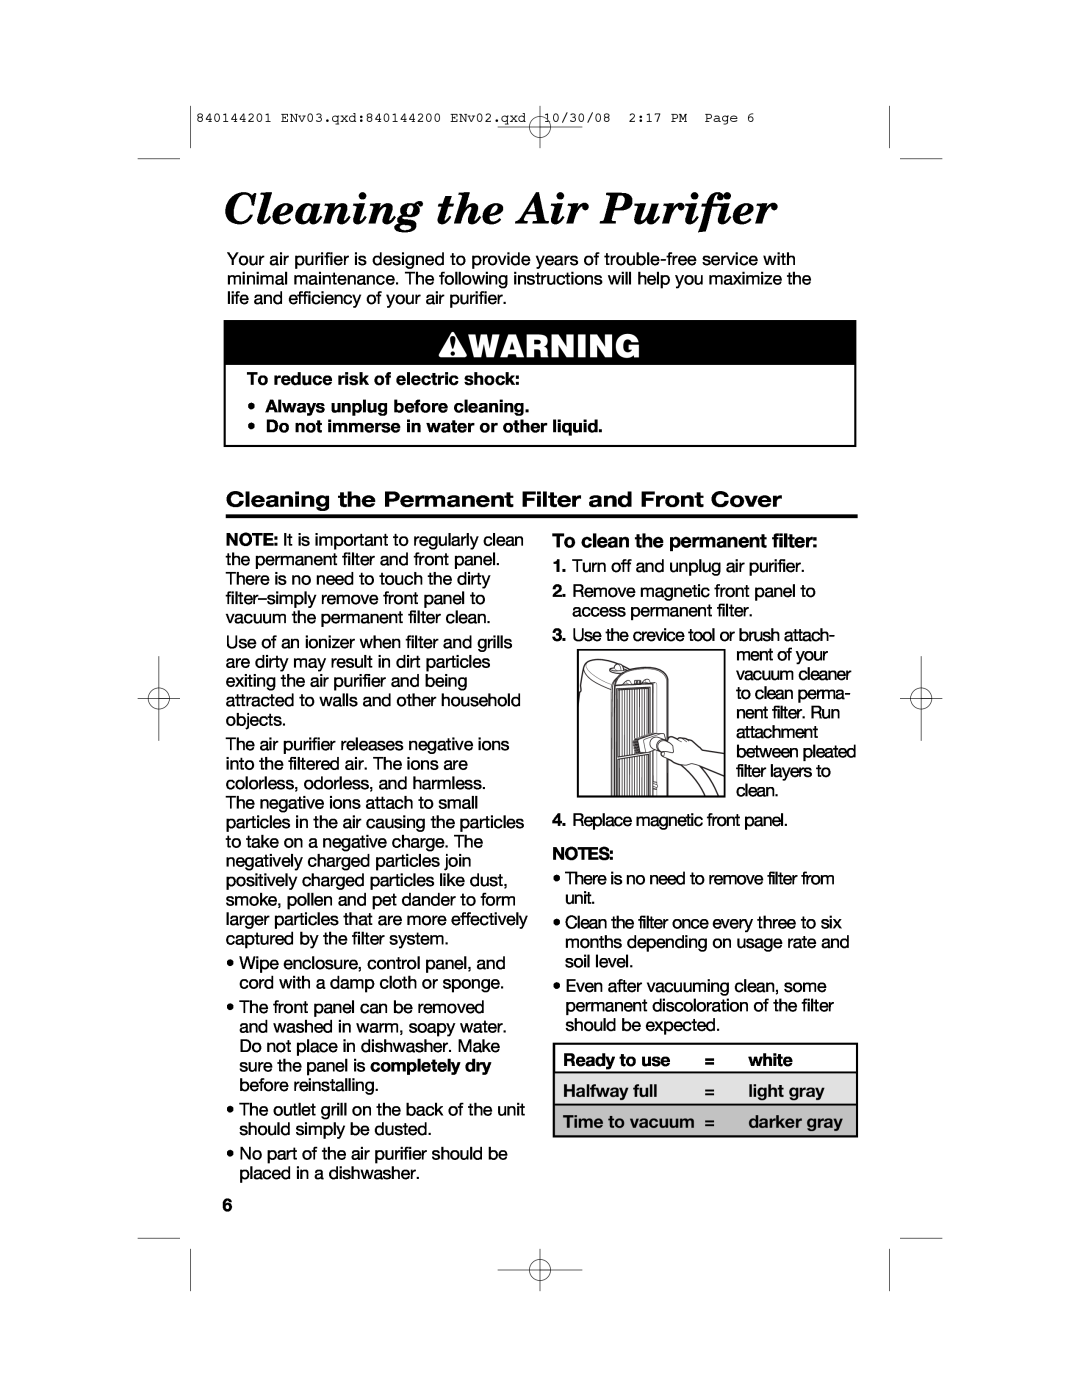 Hamilton Beach 840144201, 04992F manual Cleaning the Air Purifier, wWARNING, Cleaning the Permanent Filter and Front Cover 